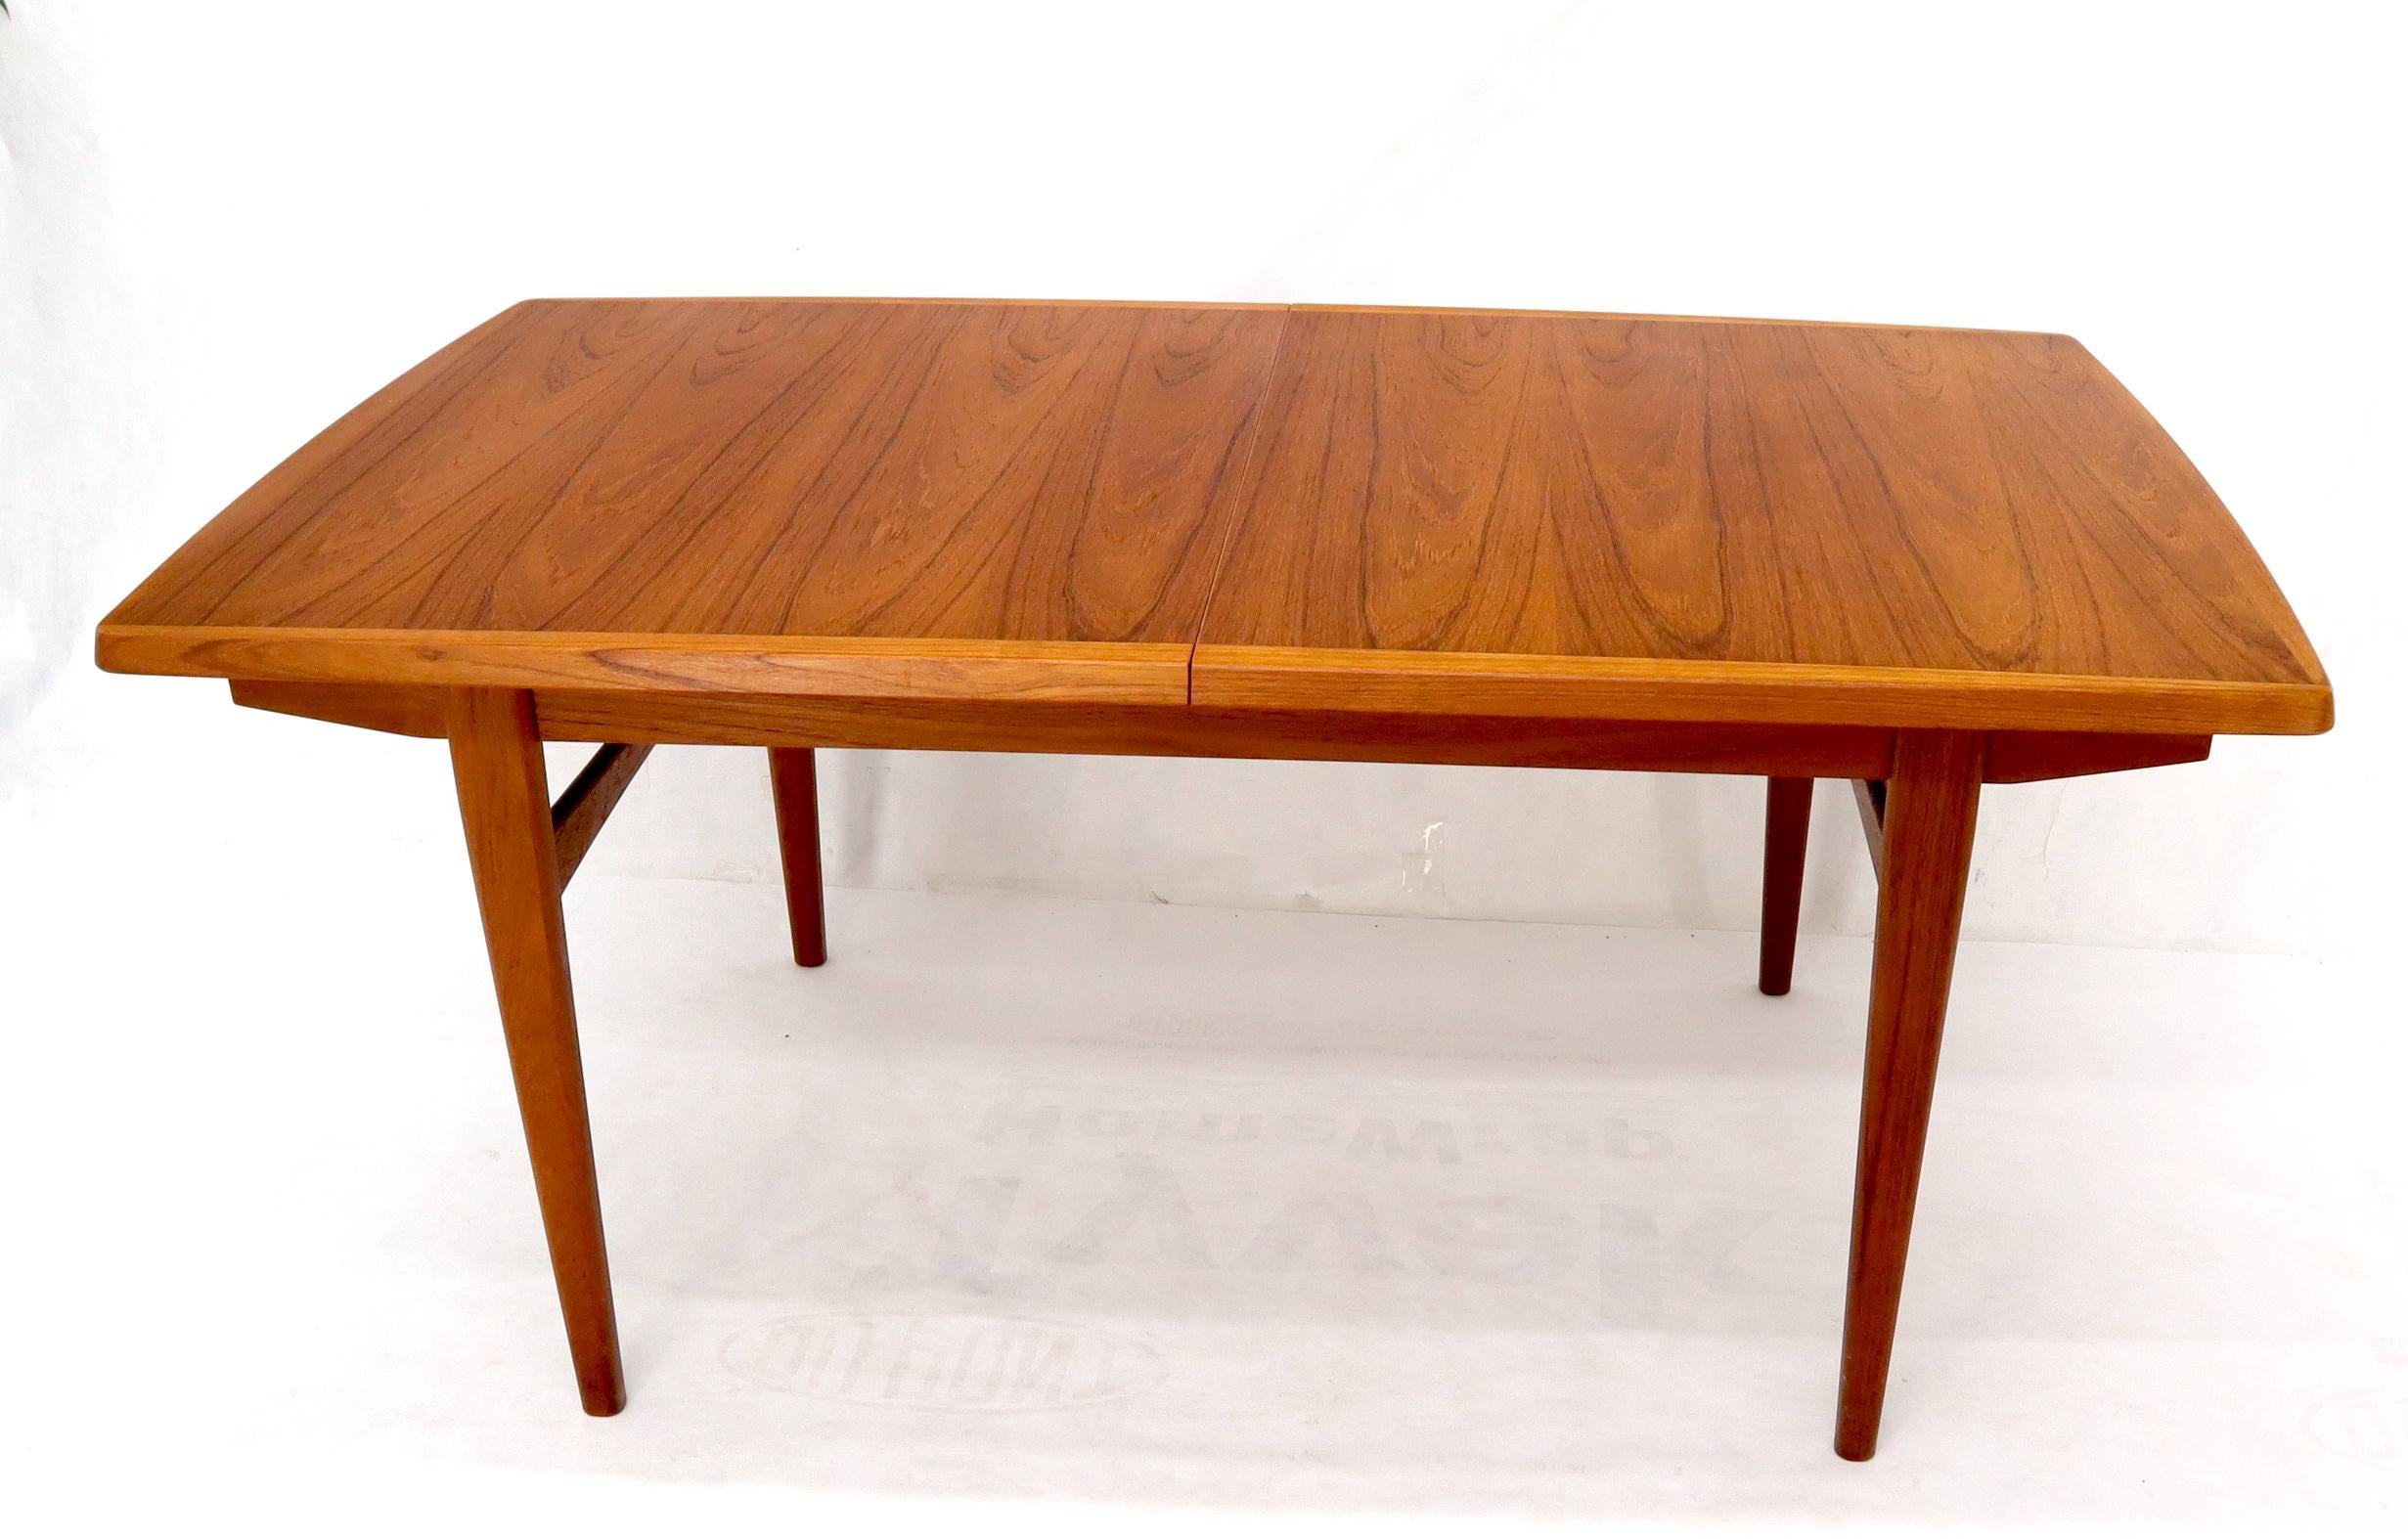 20th Century Danish Mid-Century Modern Teak Dining Table with Two Extension Boards Leaves